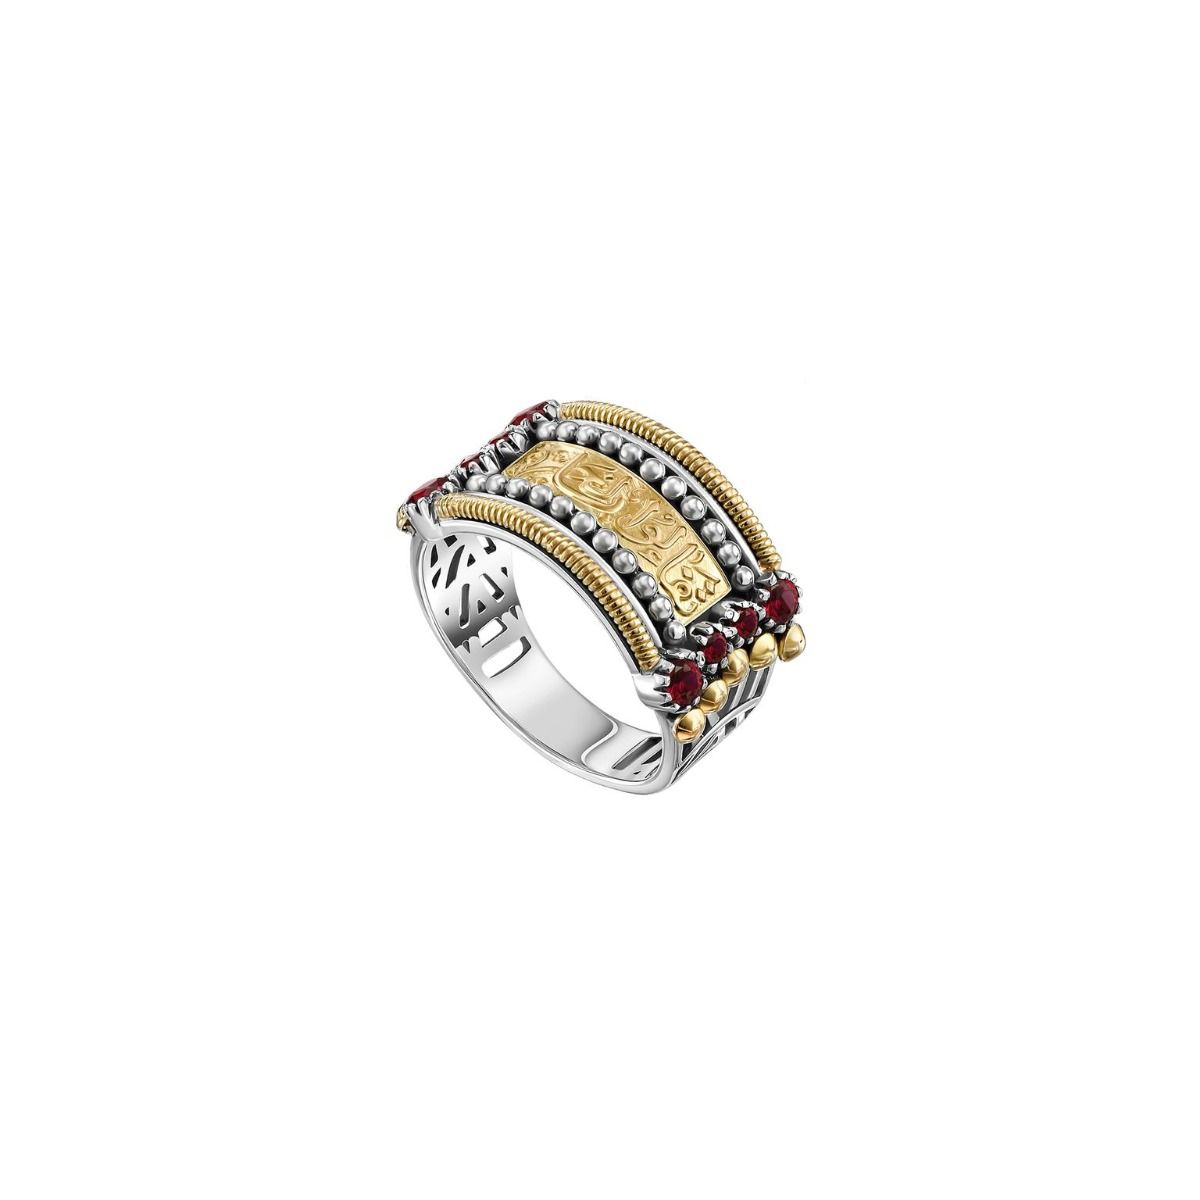 Hope Ring by Azza Fahmy - Designer Rings